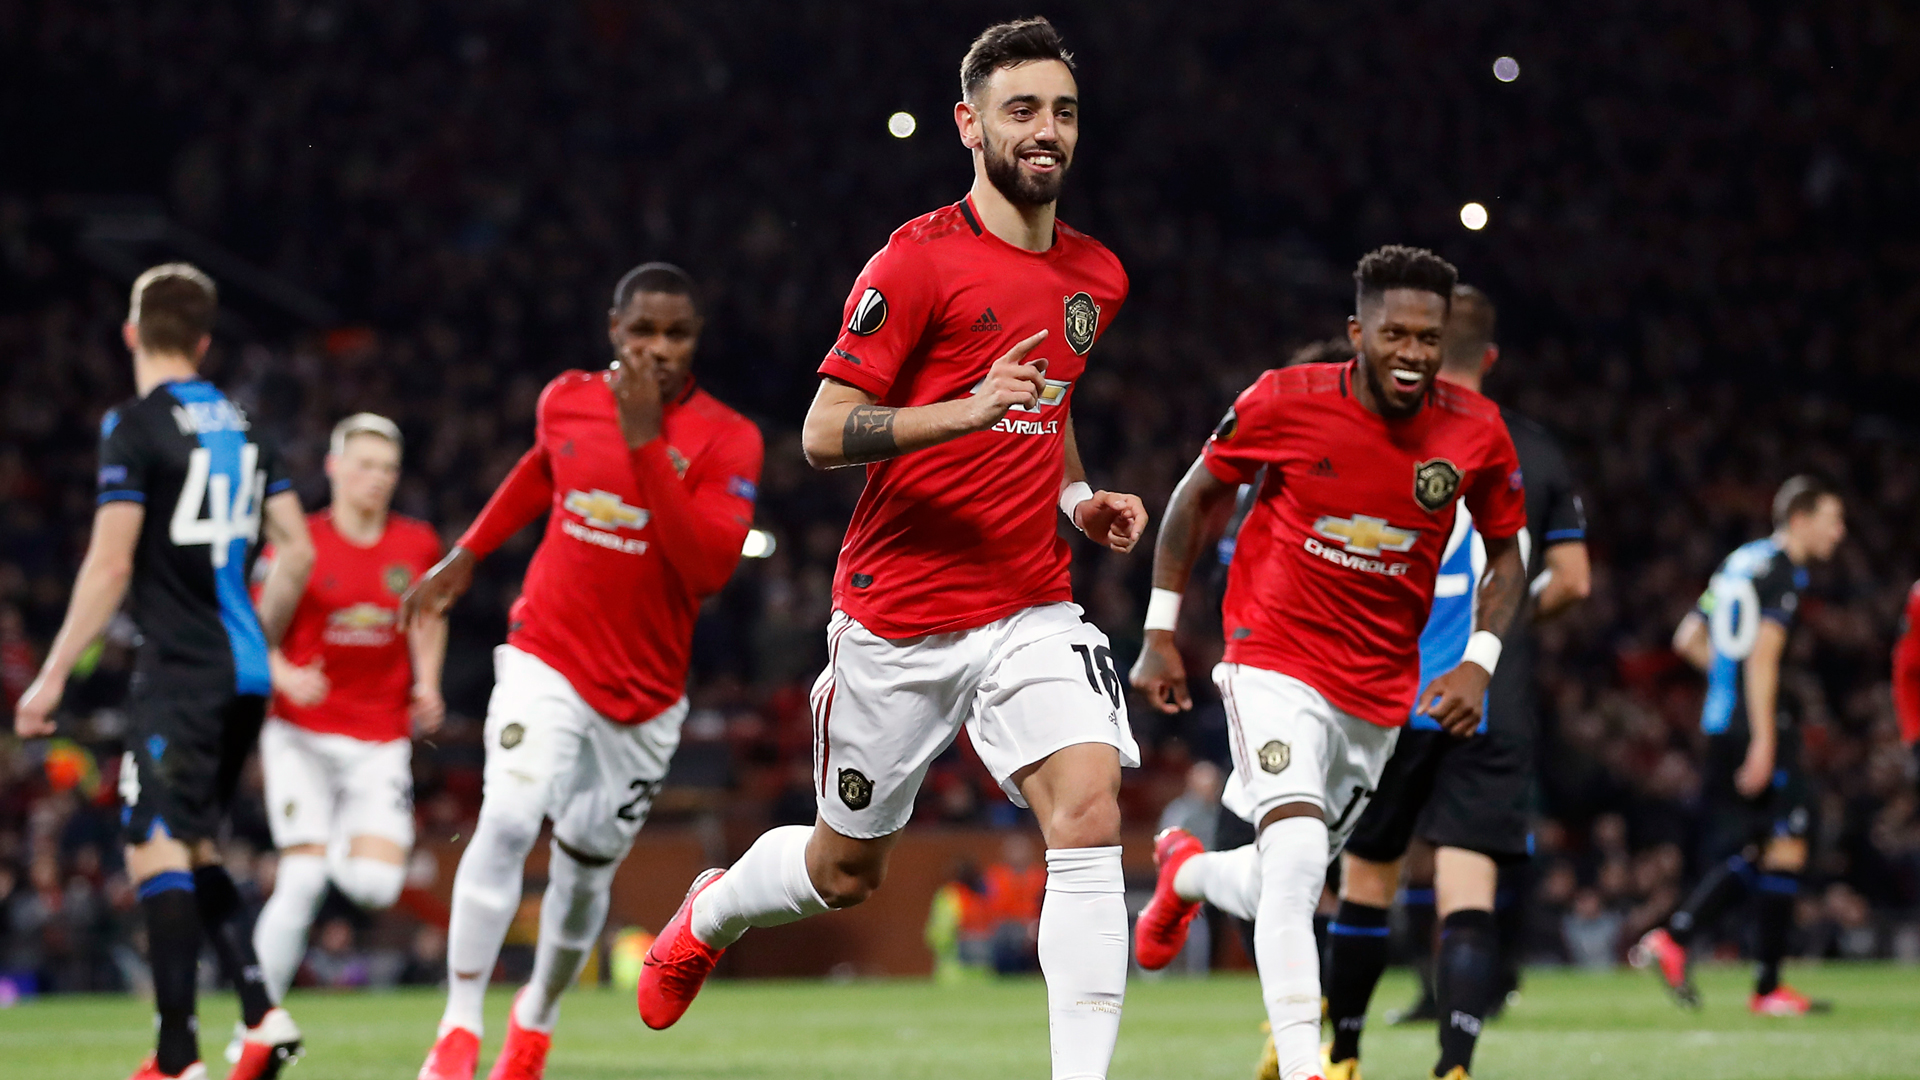 soi-keo-manchester-united-vs-bournemouth-luc-21h-ngay-4-7-2020-1